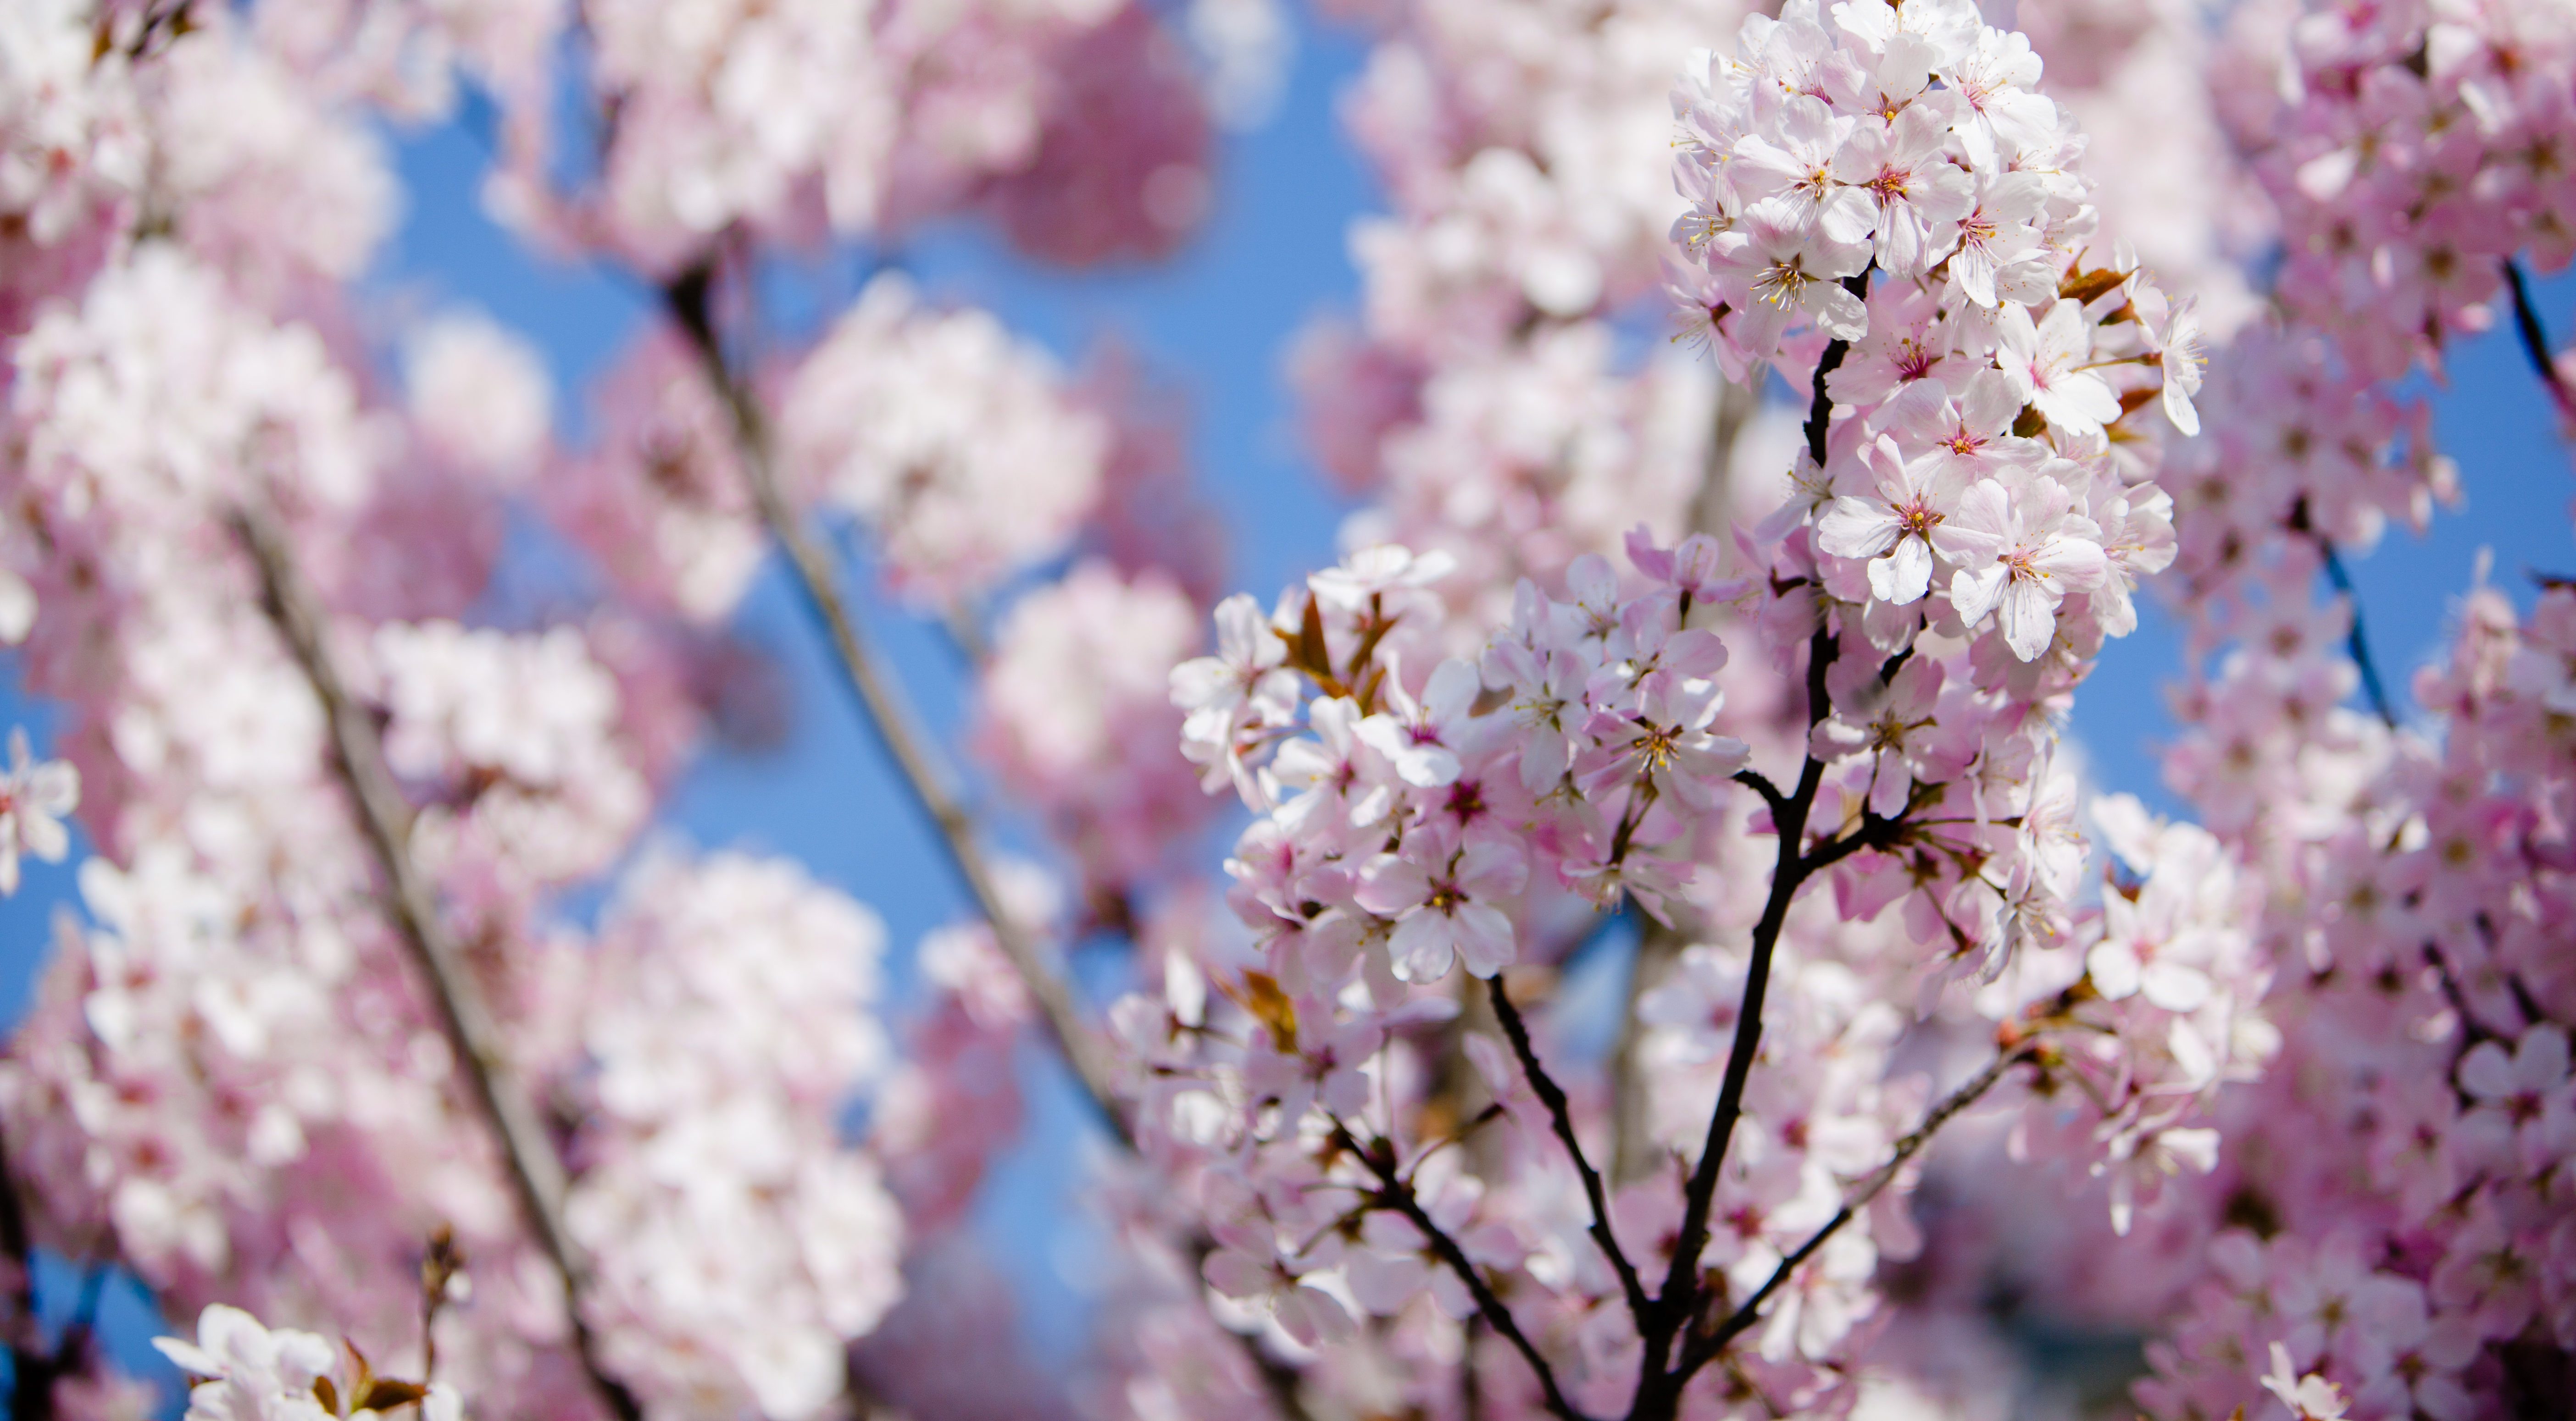 Close up photograph of pink blossom on a tree against a blue sky